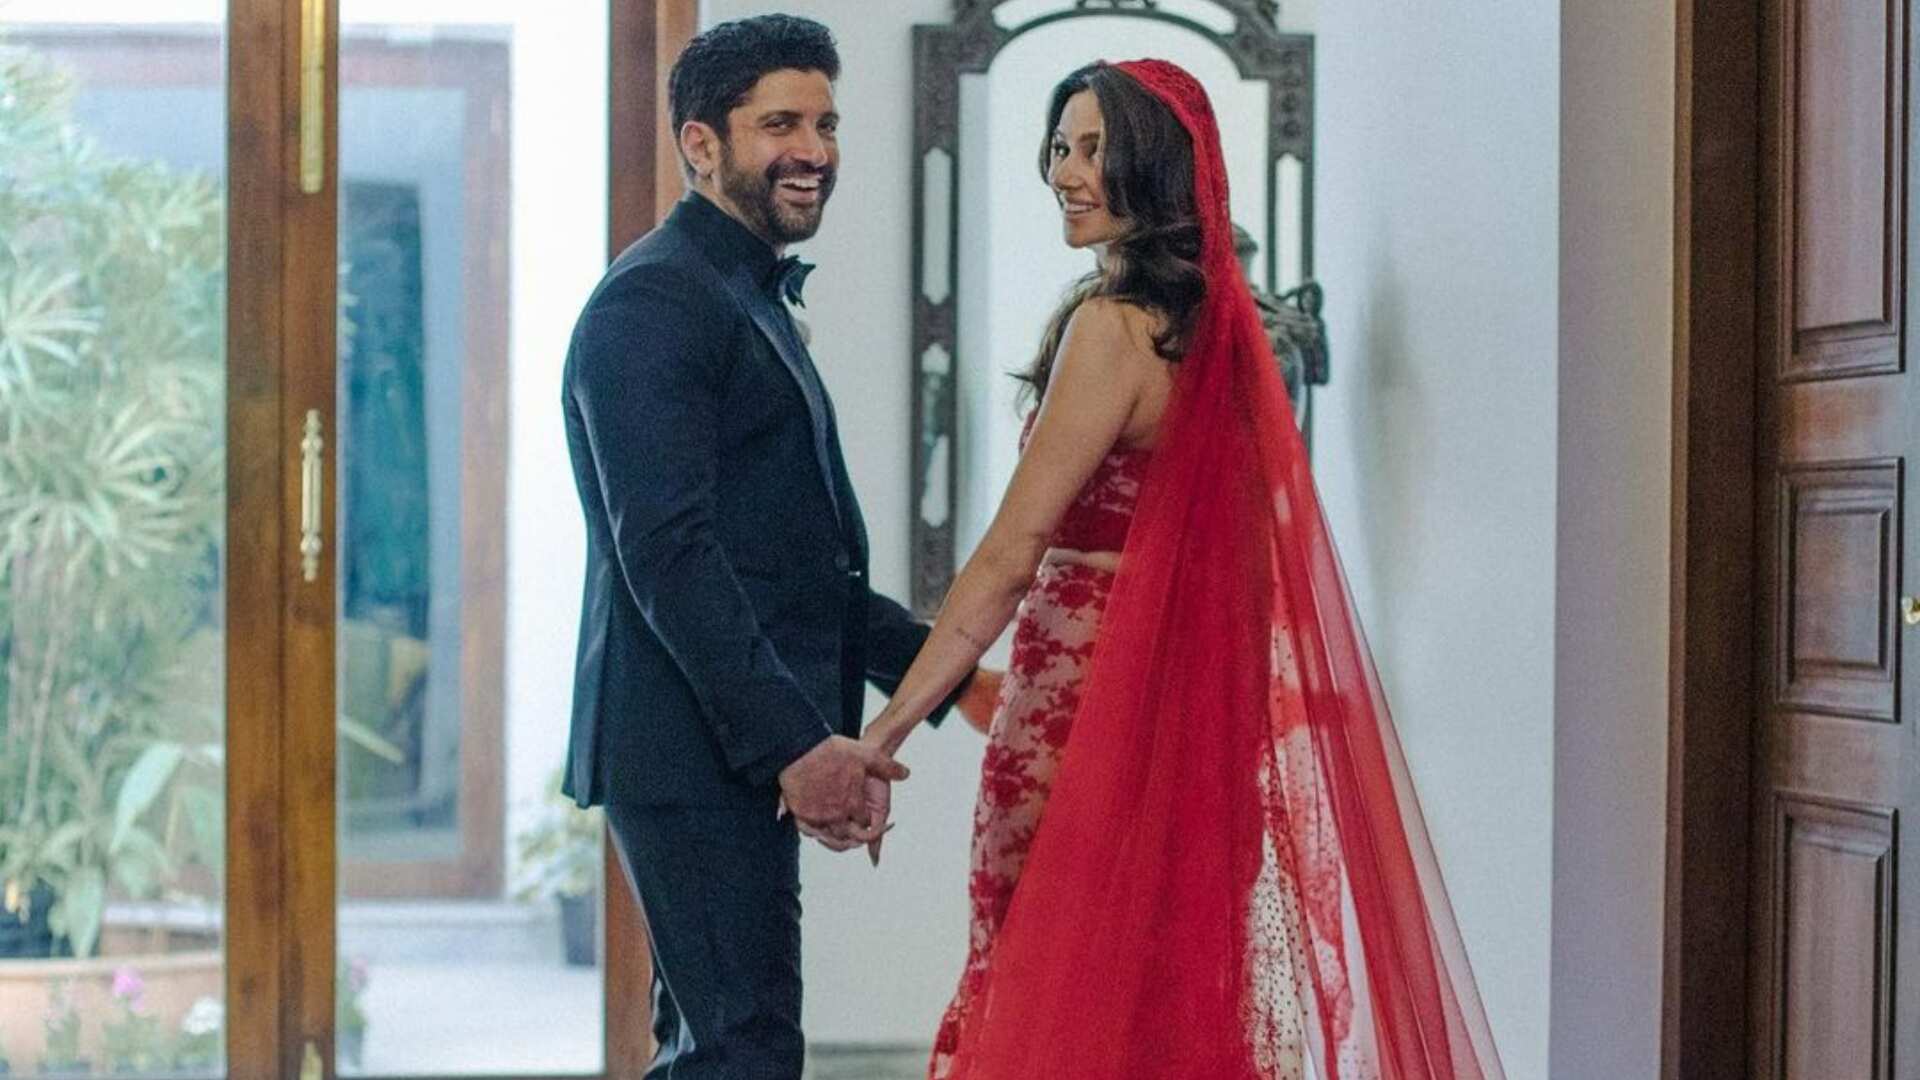 Here's what Farhan Akhtar wrote for his beautiful photos with Shibani Dandekar from their wedding